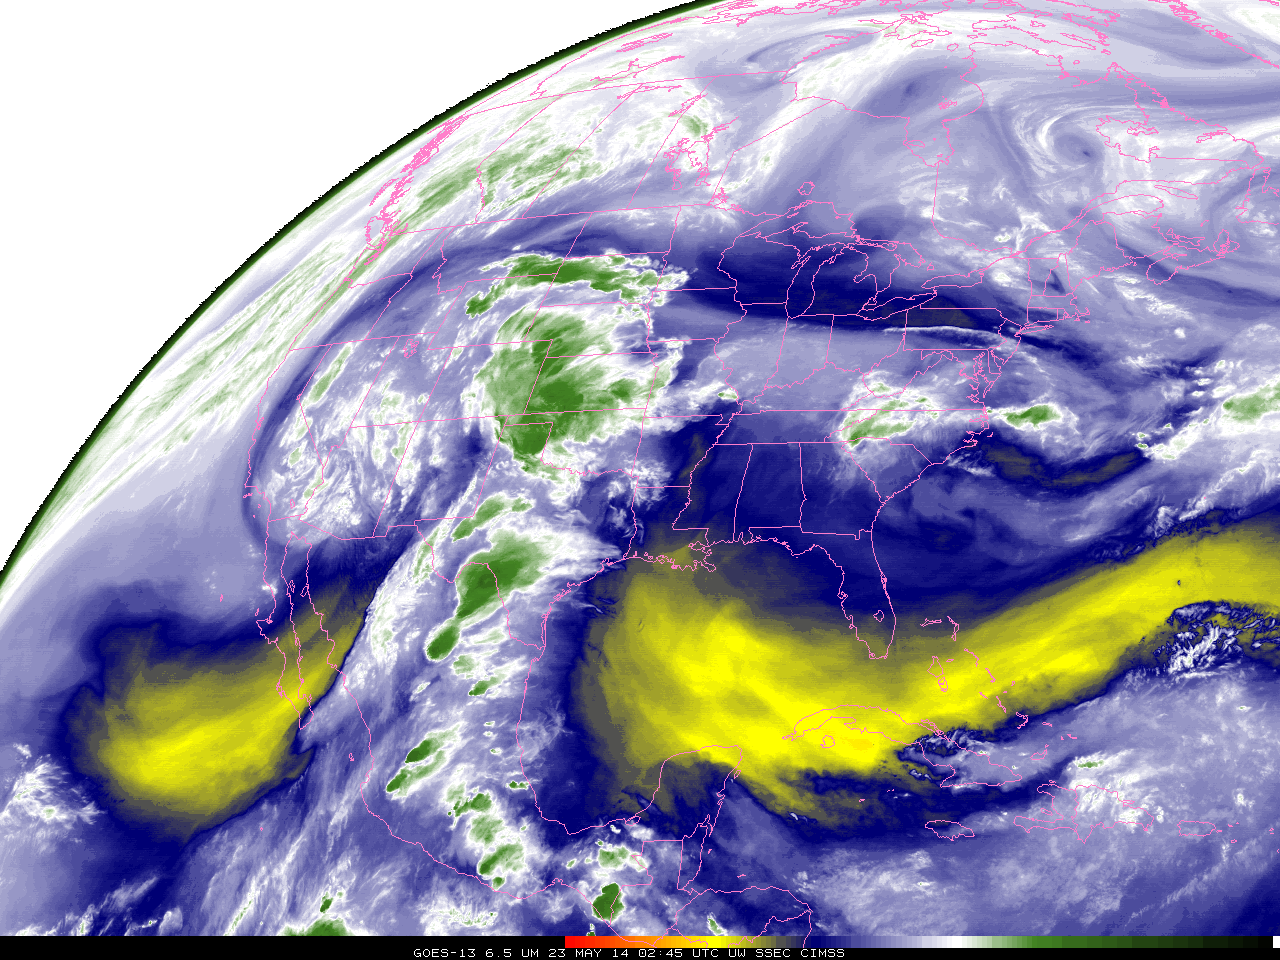 GOES-15 Imager 6.5 µm water vapor infrared channel images (click to play animation)